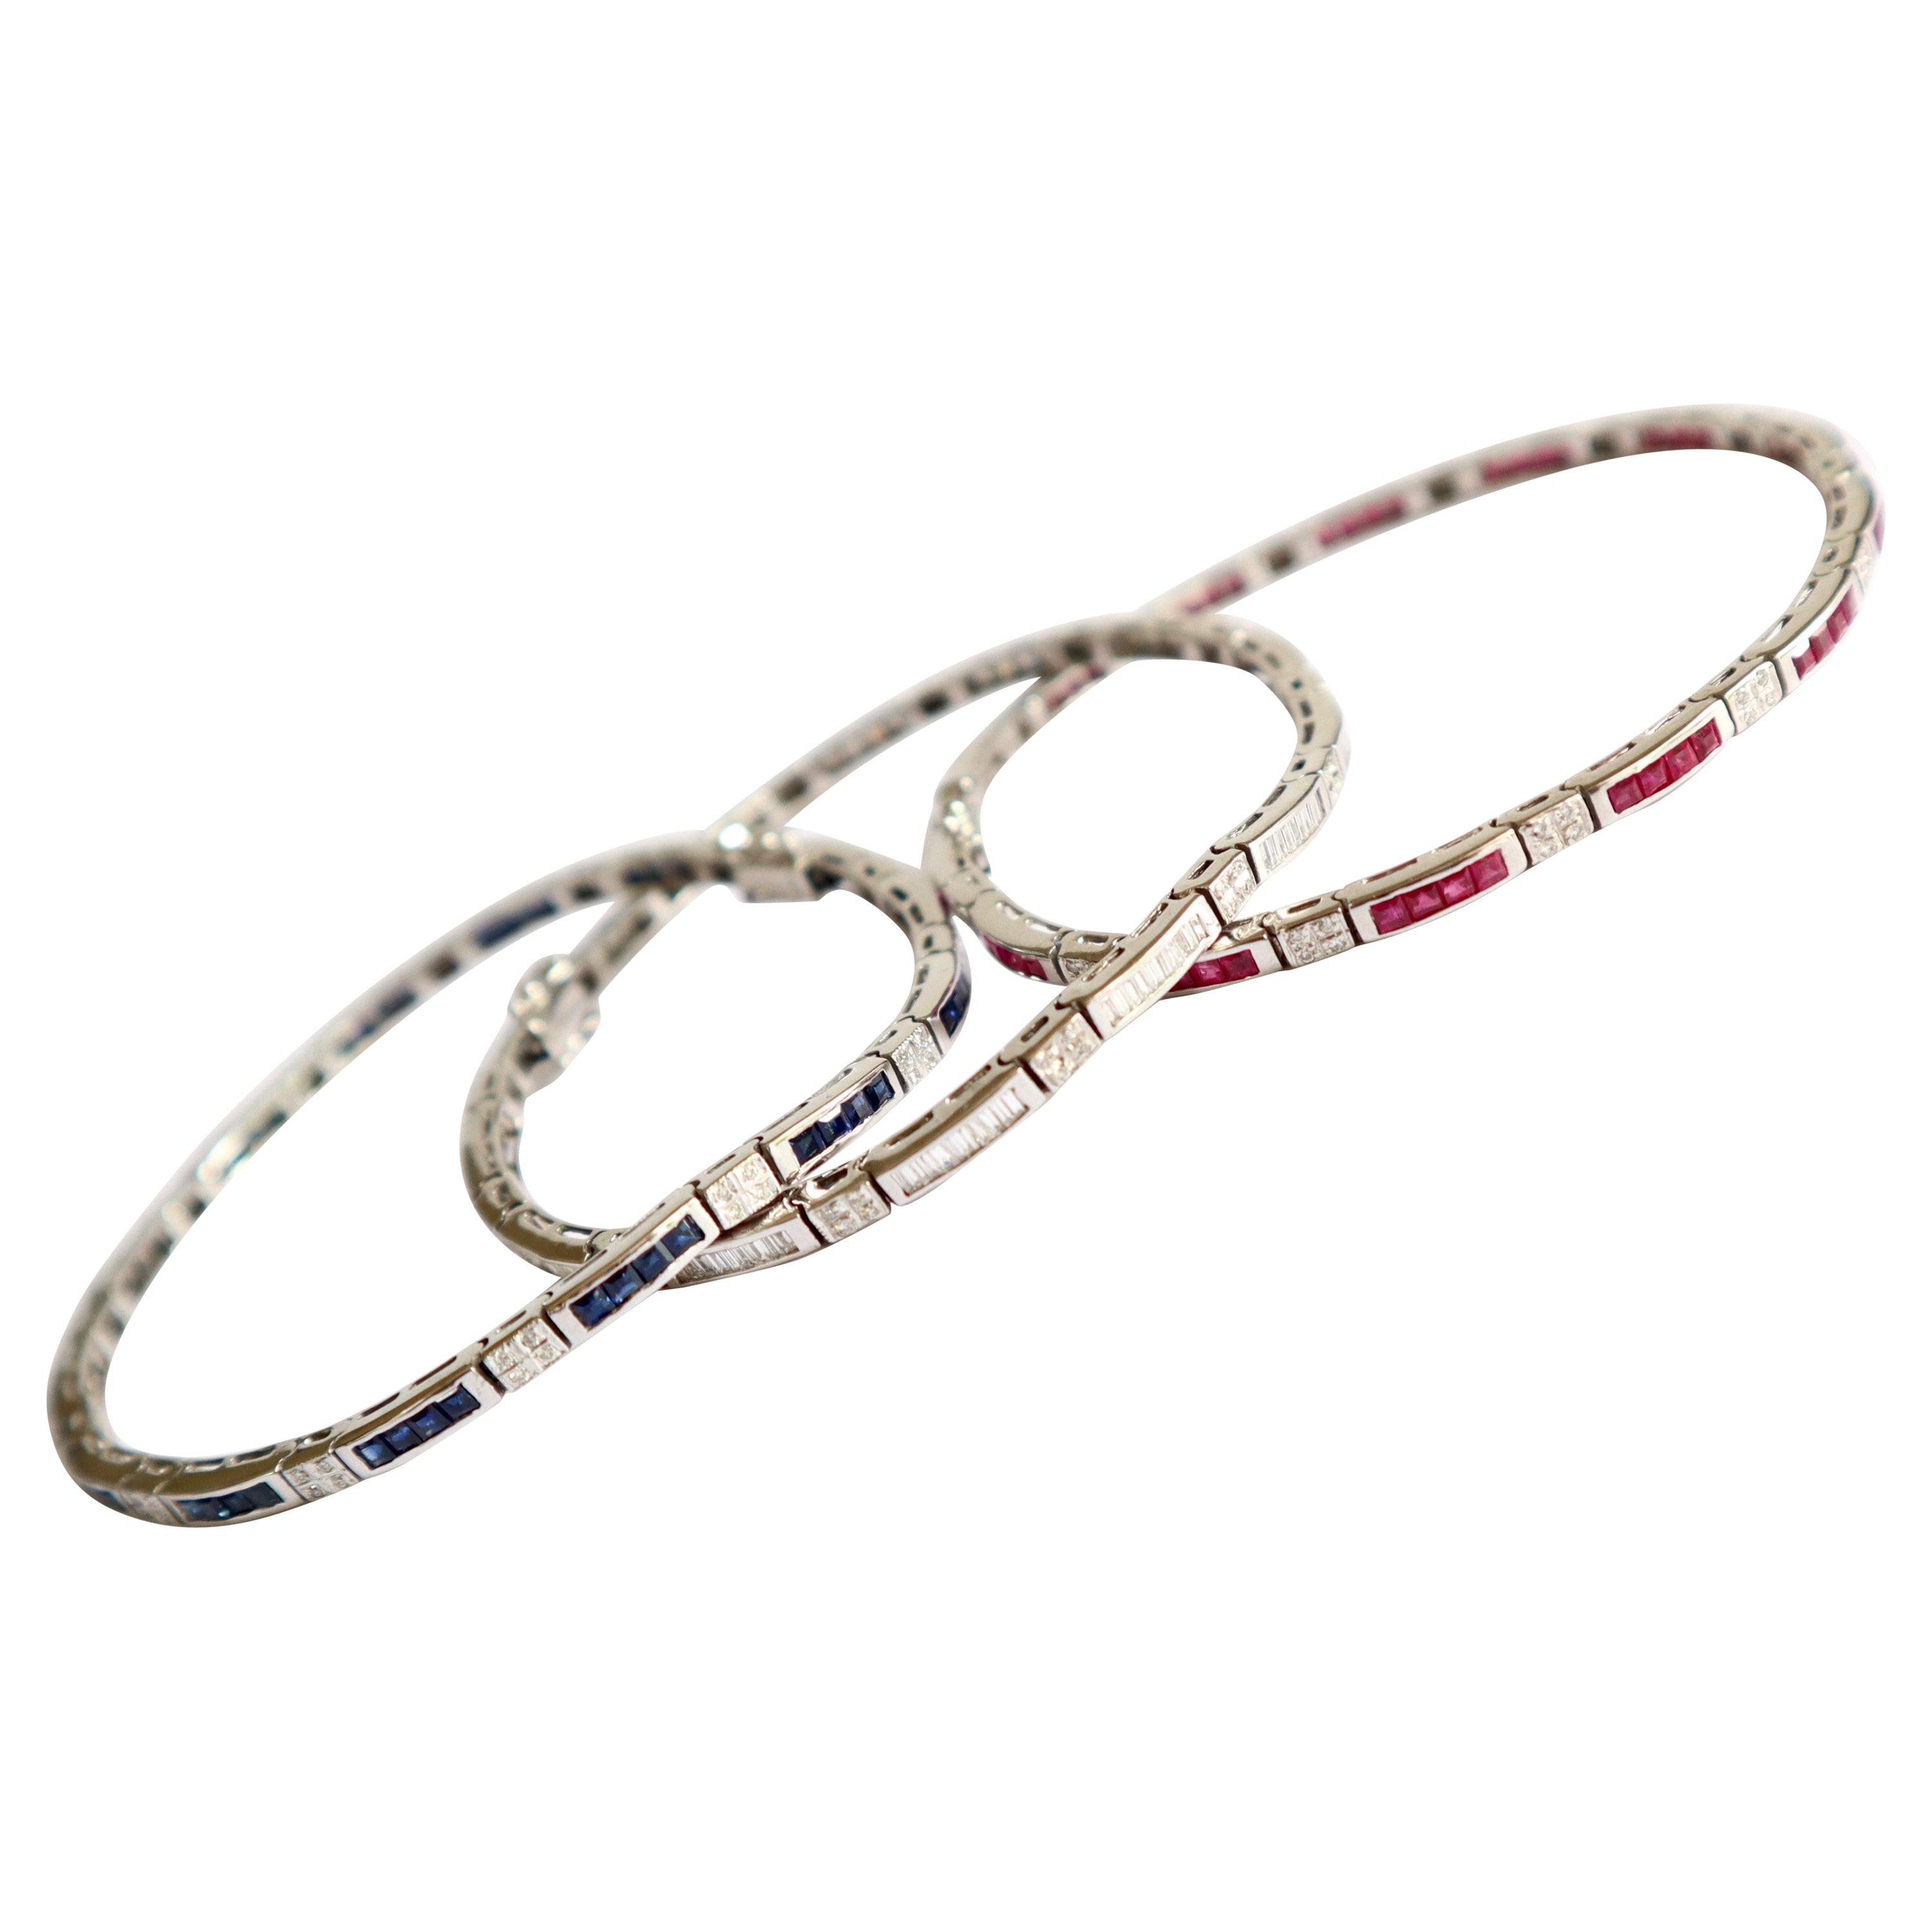 Set of 3 Bracelets in 18 Kt White Gold, Rubies, Diamonds, Sapphires For Sale